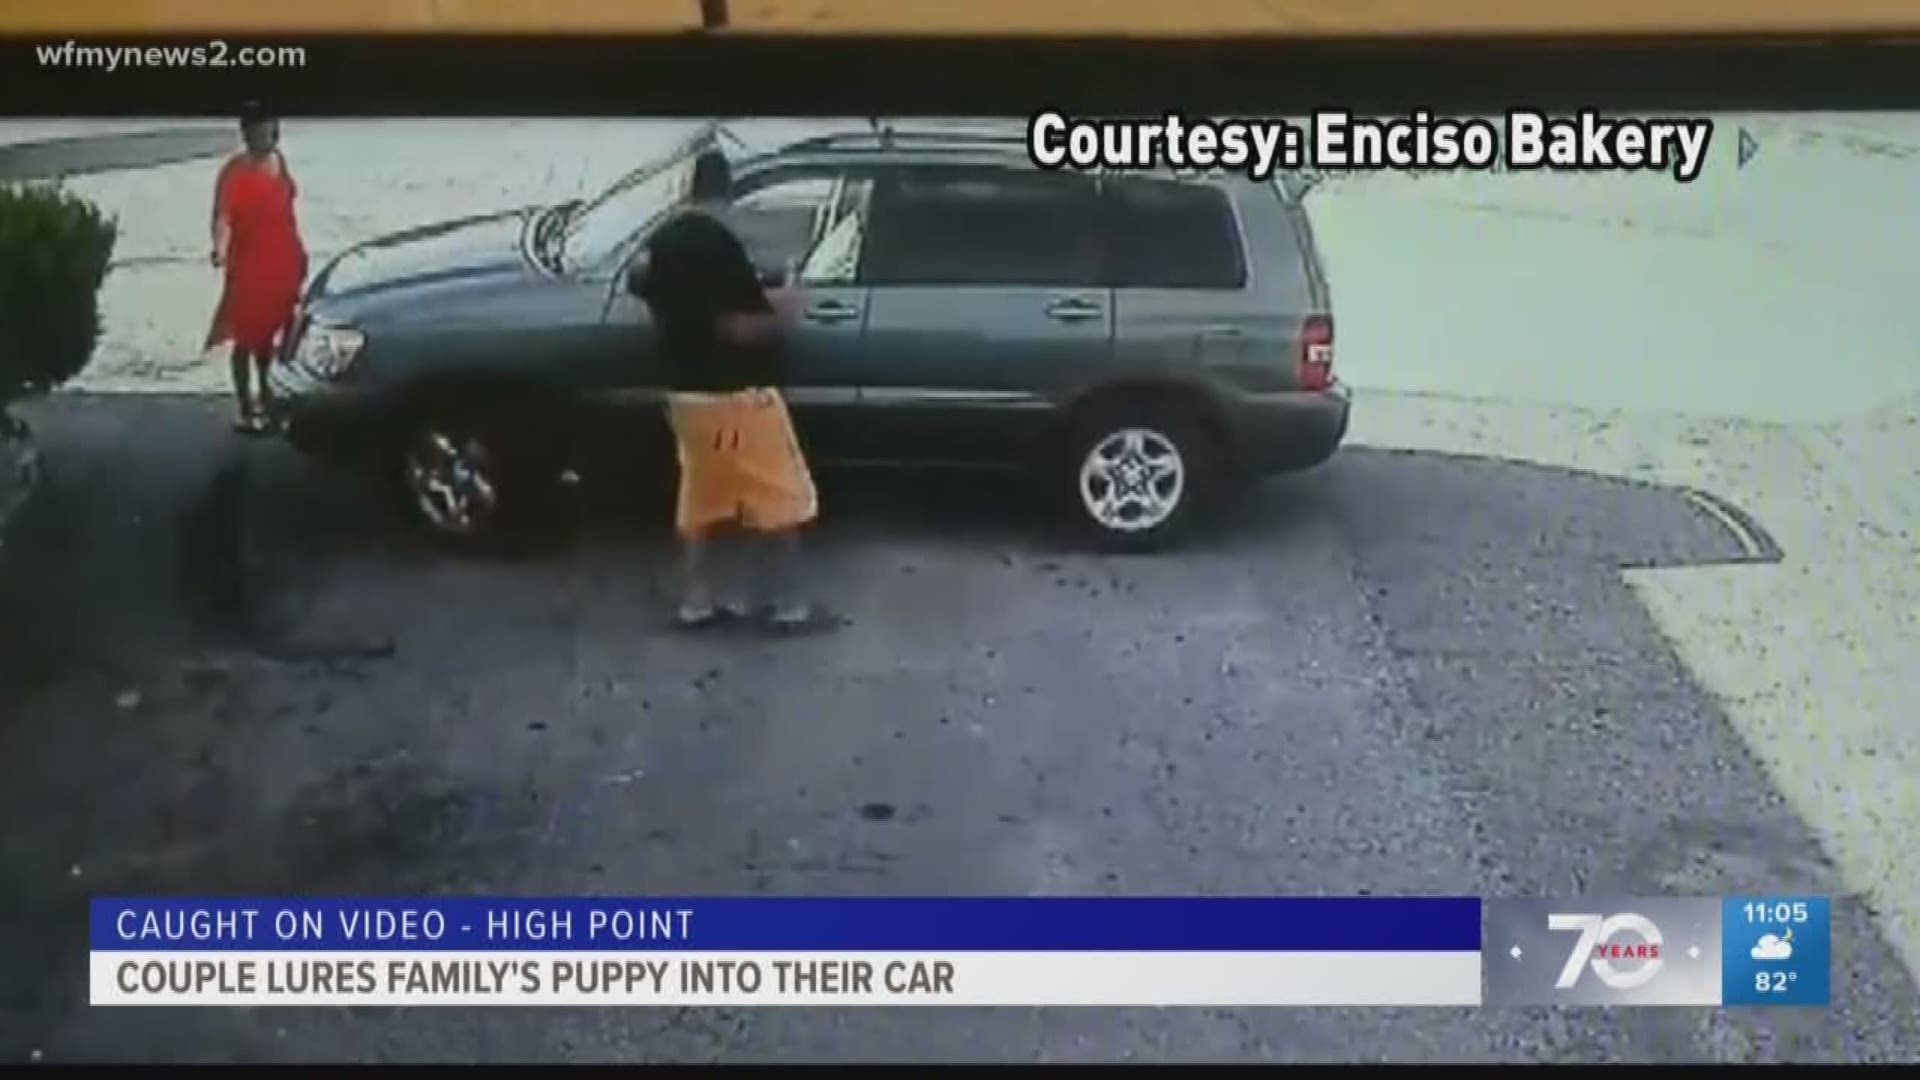 The family was getting ready to leave their business when someone snatched the puppy